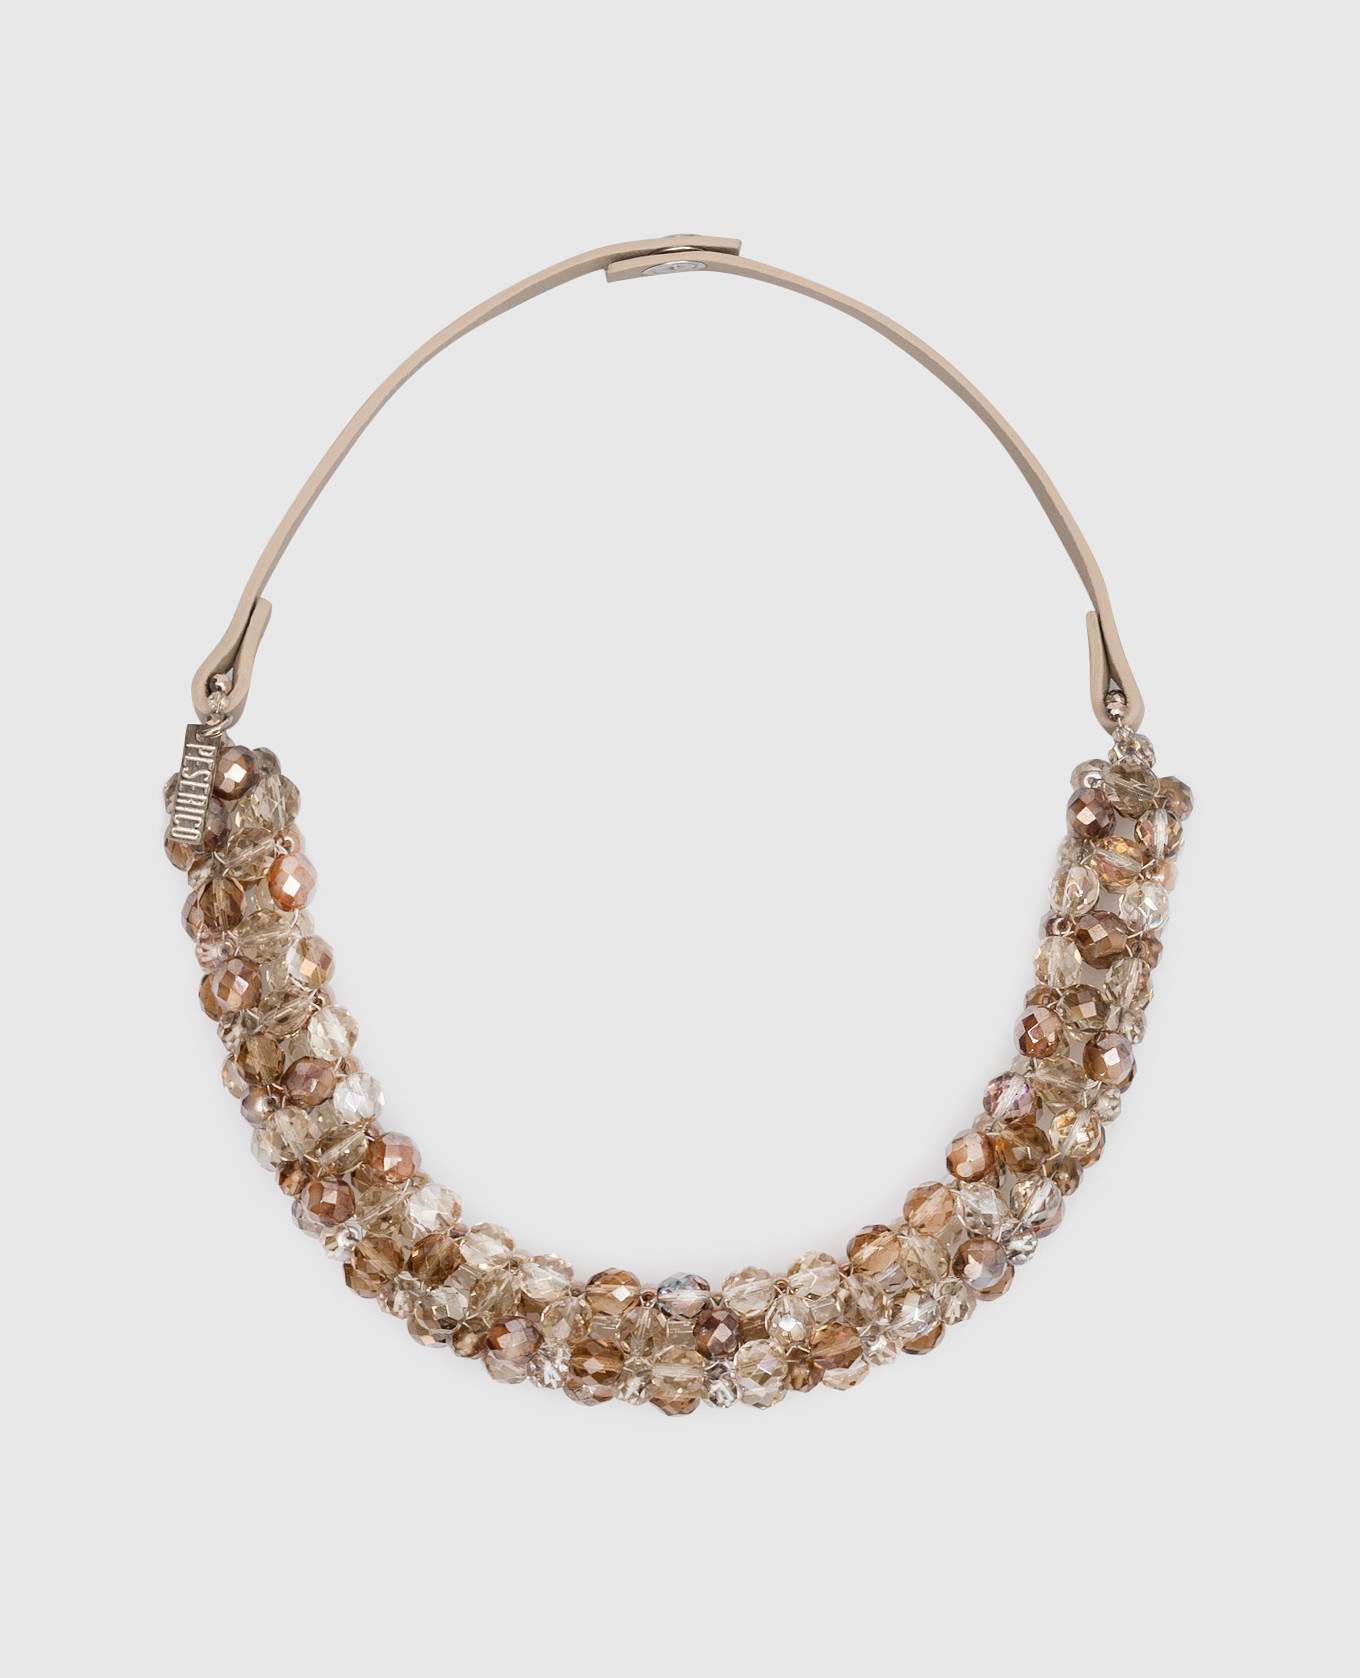 Brown necklace with beads